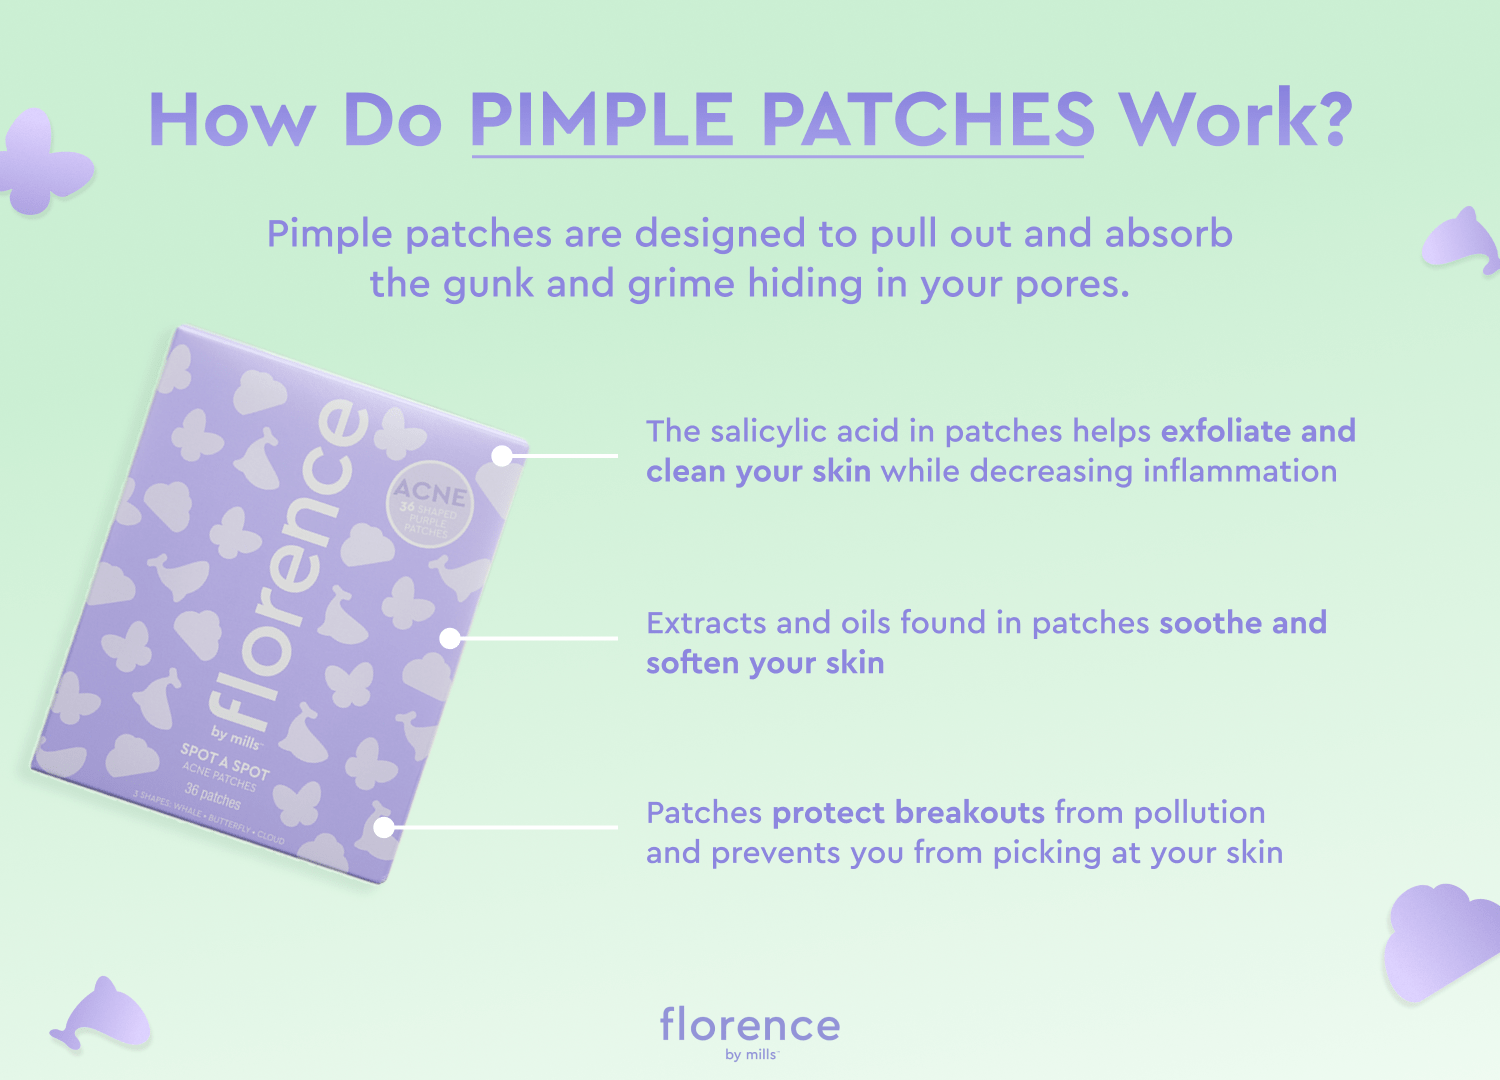 How Do Pimple Patches Work? By florence by mills